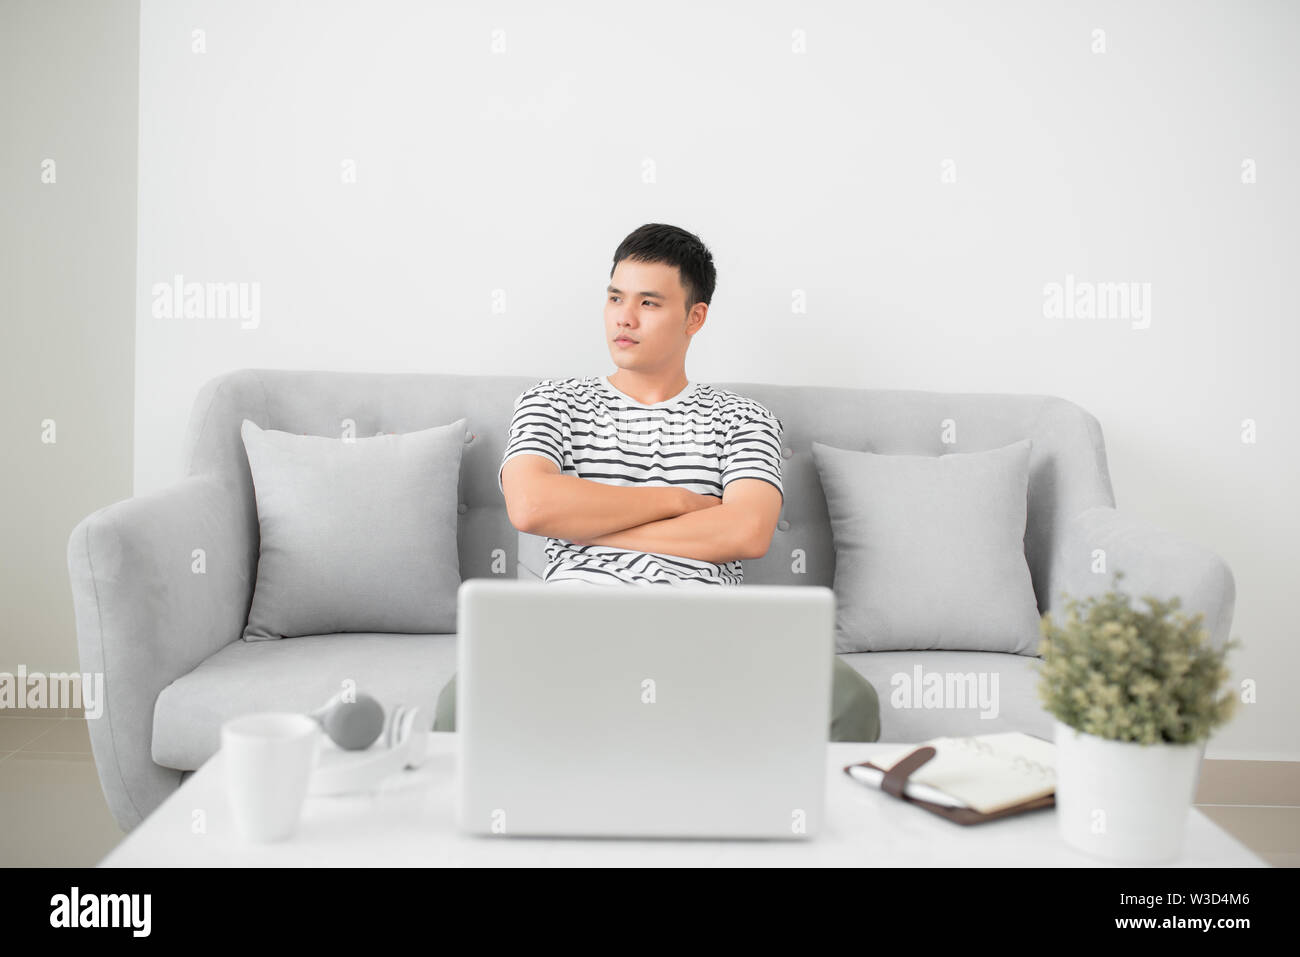 Thoughtful pensive handsome serious male thinking about new idea or project analysing planning making decision concept Stock Photo